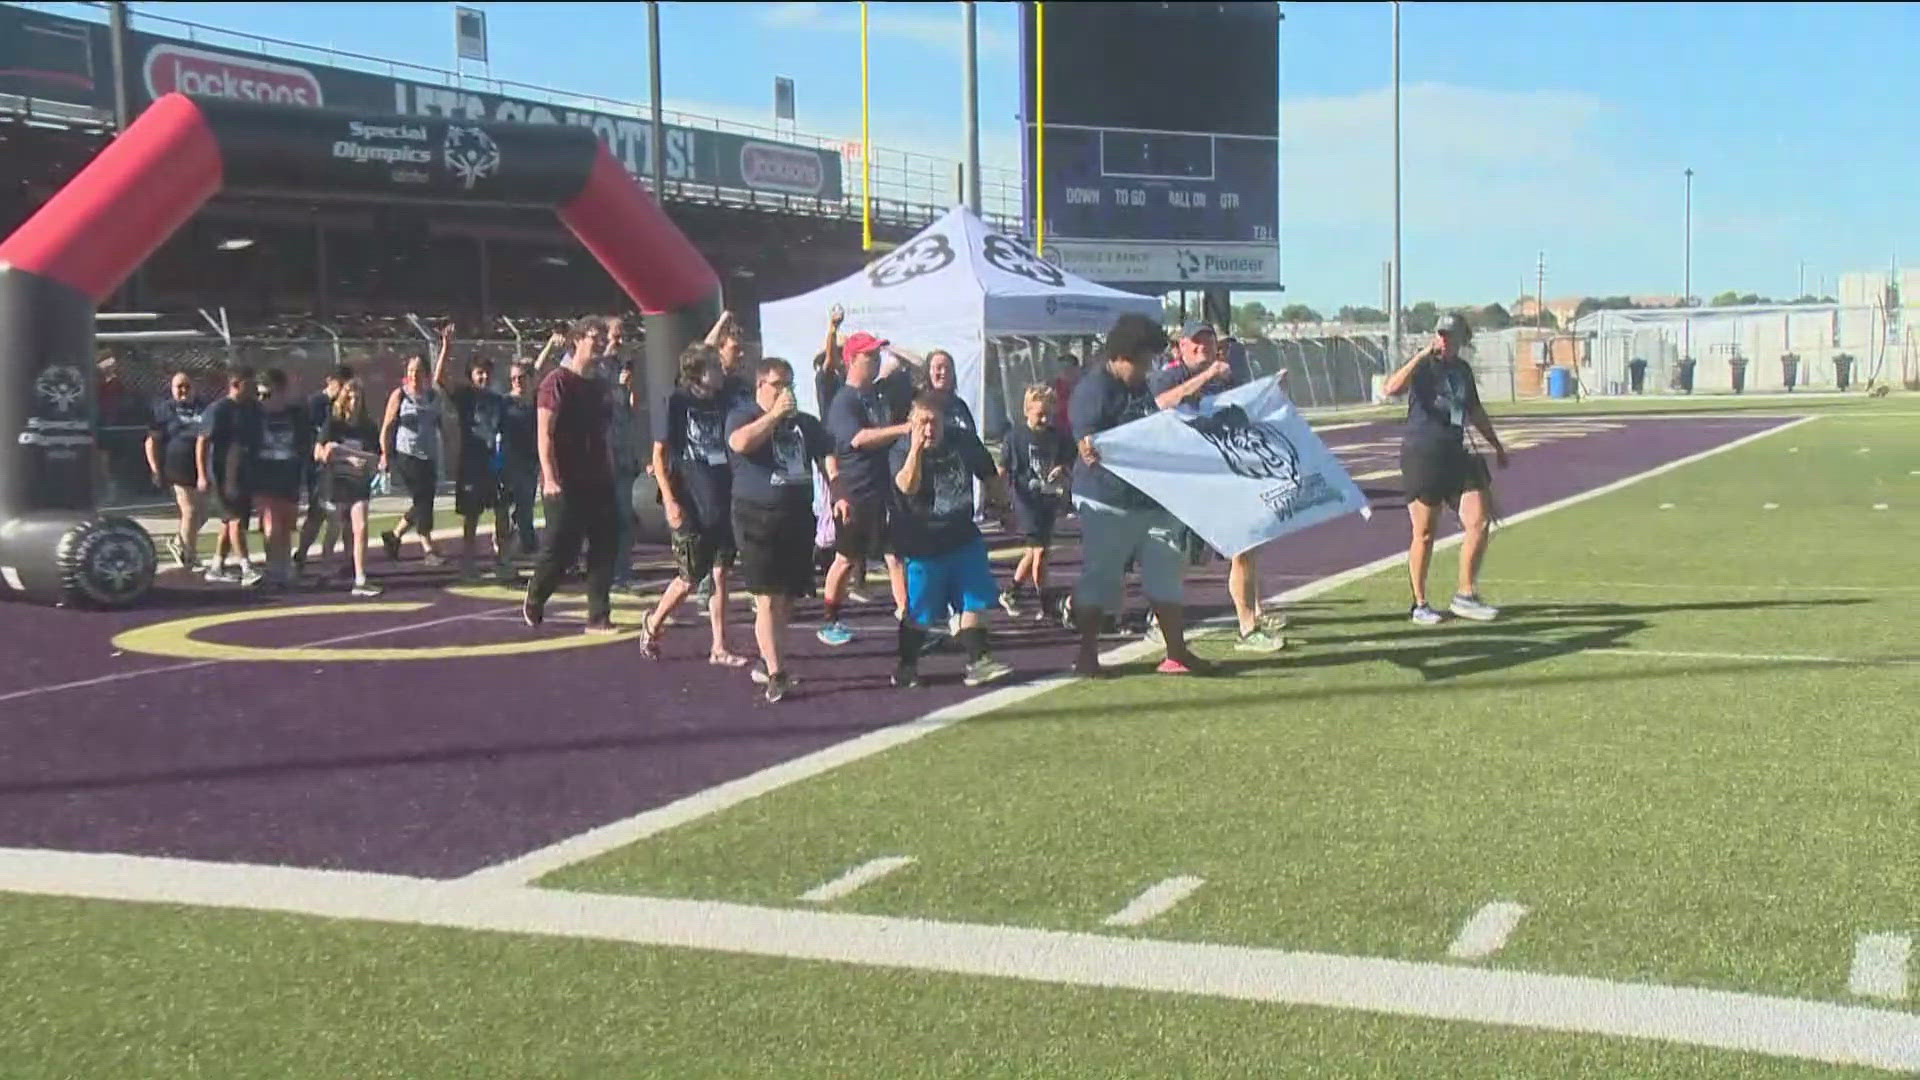 More than a thousand athletes across the Gem State compete in this year's games in the Treasure Valley.